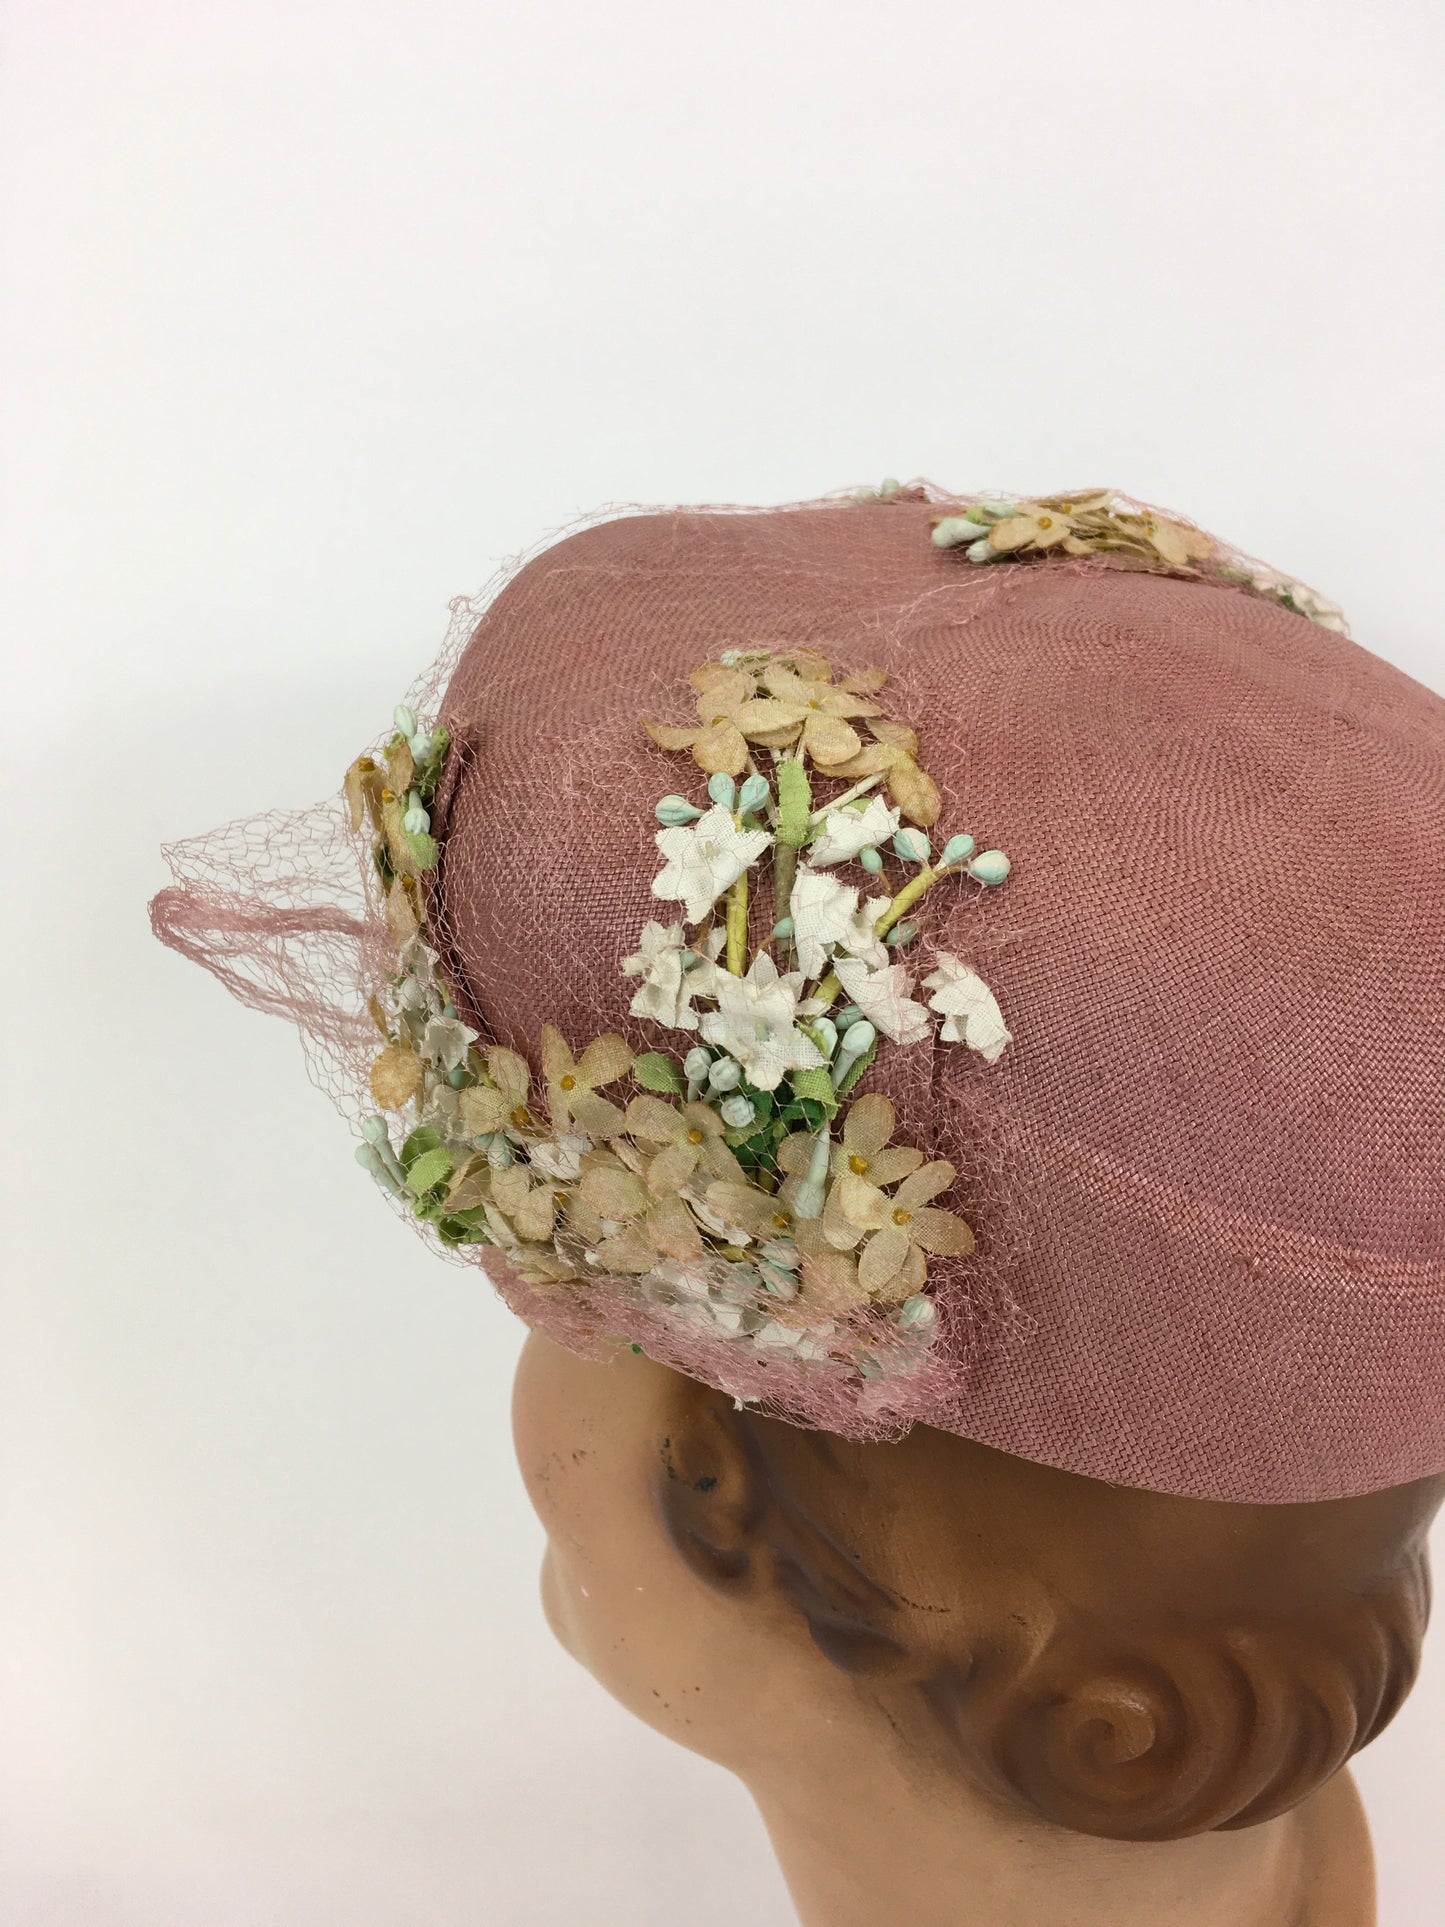 Original 1940’s Darling Powdered Rose Pink Hat - With Veiling and Beautiful Millinery Flower Embellishments